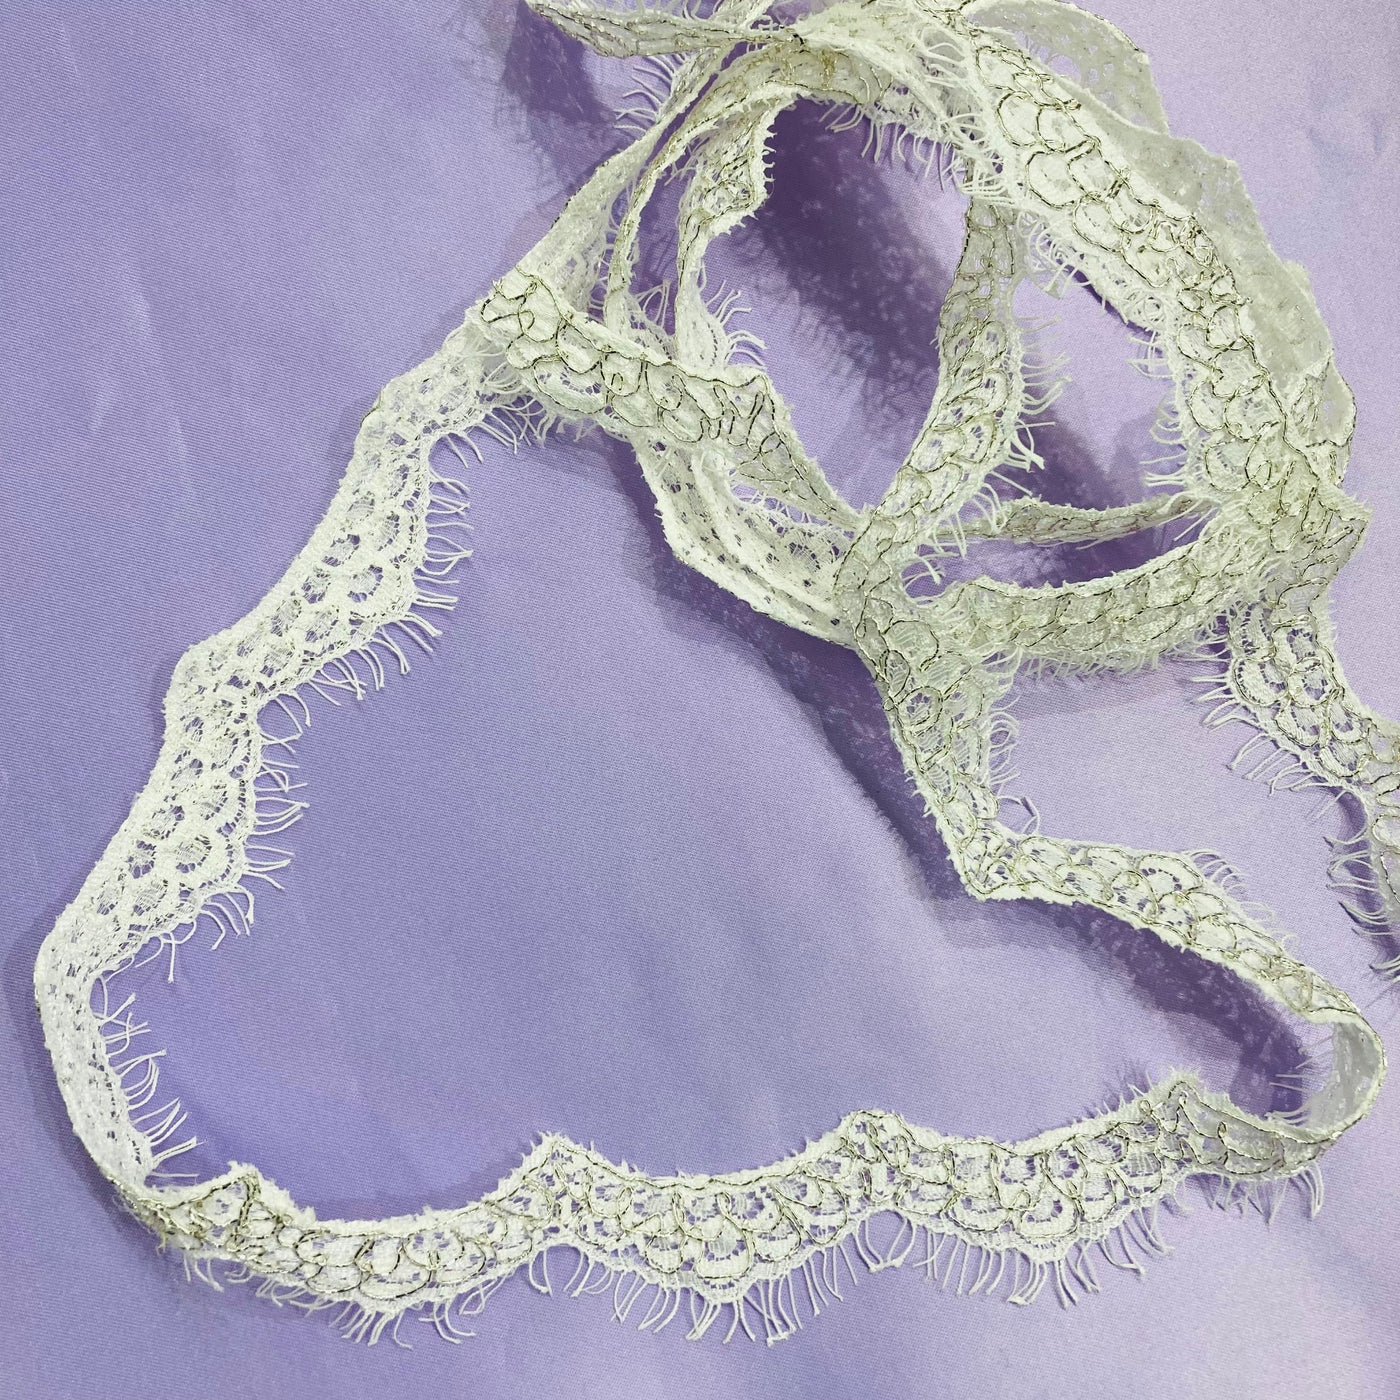 Corded Eyelash Lace Trimming Embroidered on 100% Polyester Net Mesh. Lace USA